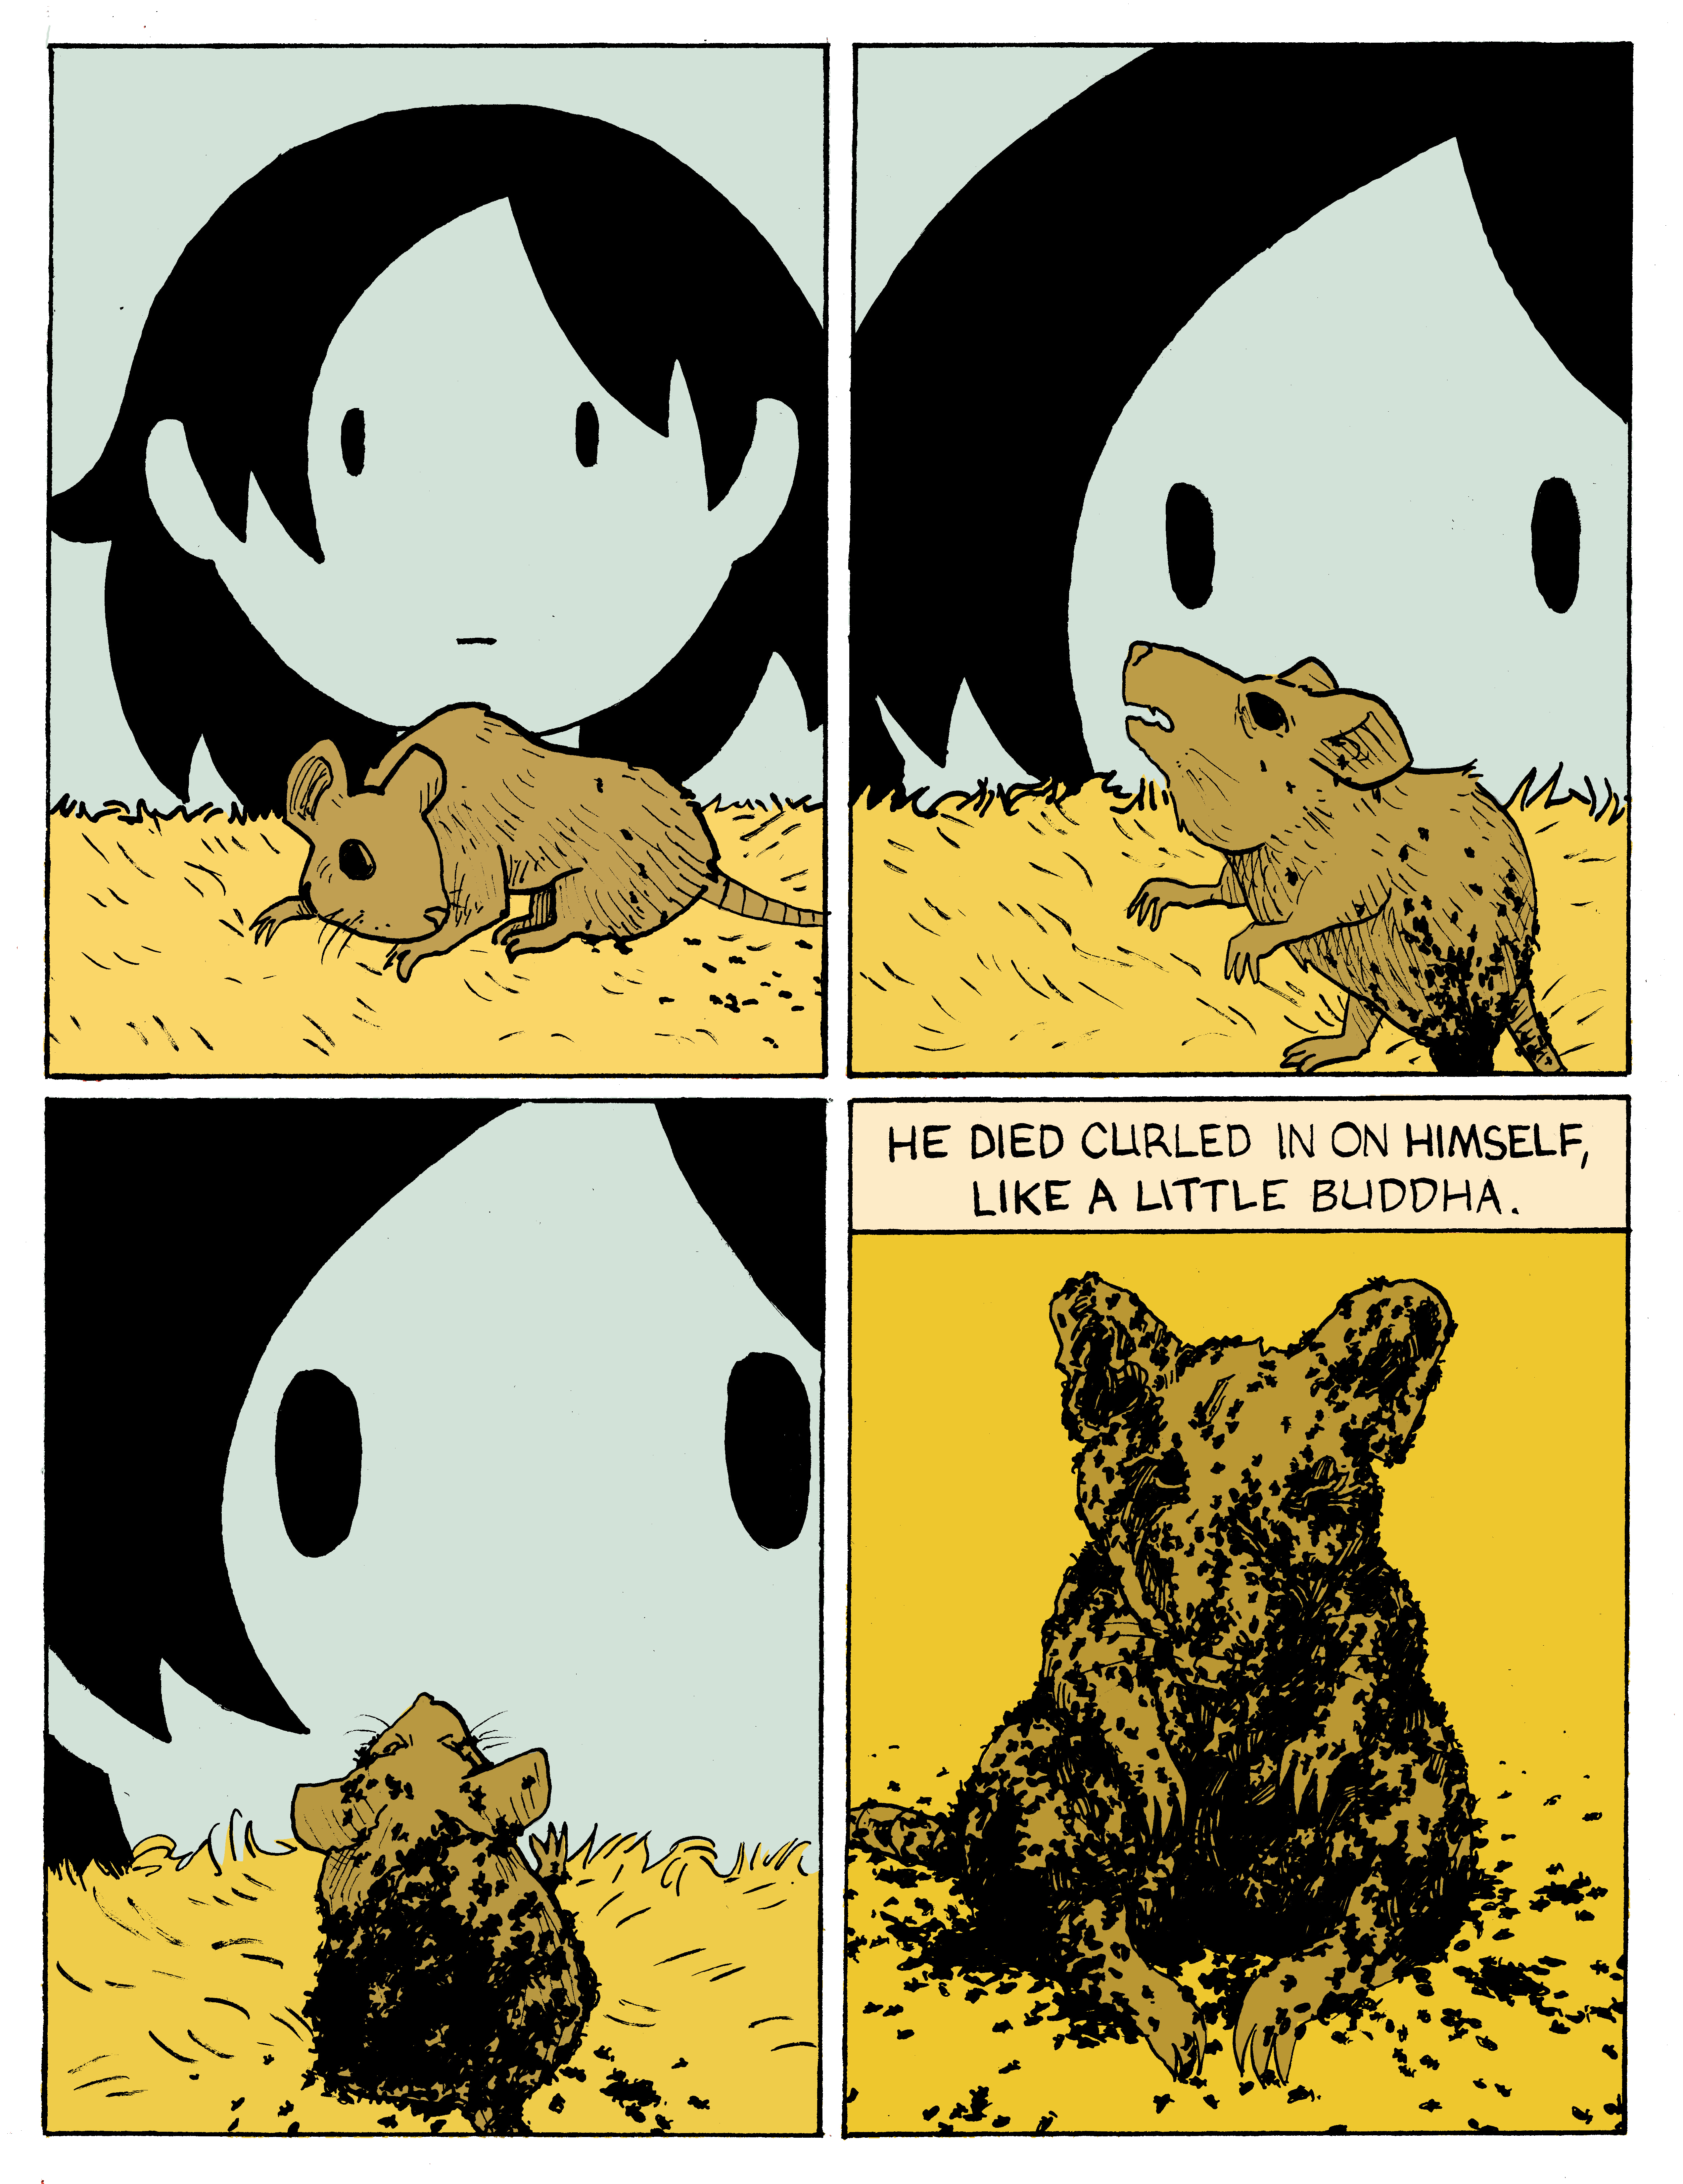 A four-panel sequence in blue and yellow. In the first panel, a child watches ants crawl onto a mouse in a cage. In the second panel, the ants cover the entire leg of the mouse and continue travelling upwards. The mouse looks distressed. In the third panel, the mouse turns to the child, its body swarming with ants. In the fourth panel, the mouse has been consumed. Ants pour out of its ears, eye sockets, and belly. The caption on the fourth panel reads: He died curled in on himself, like a little Buddha.